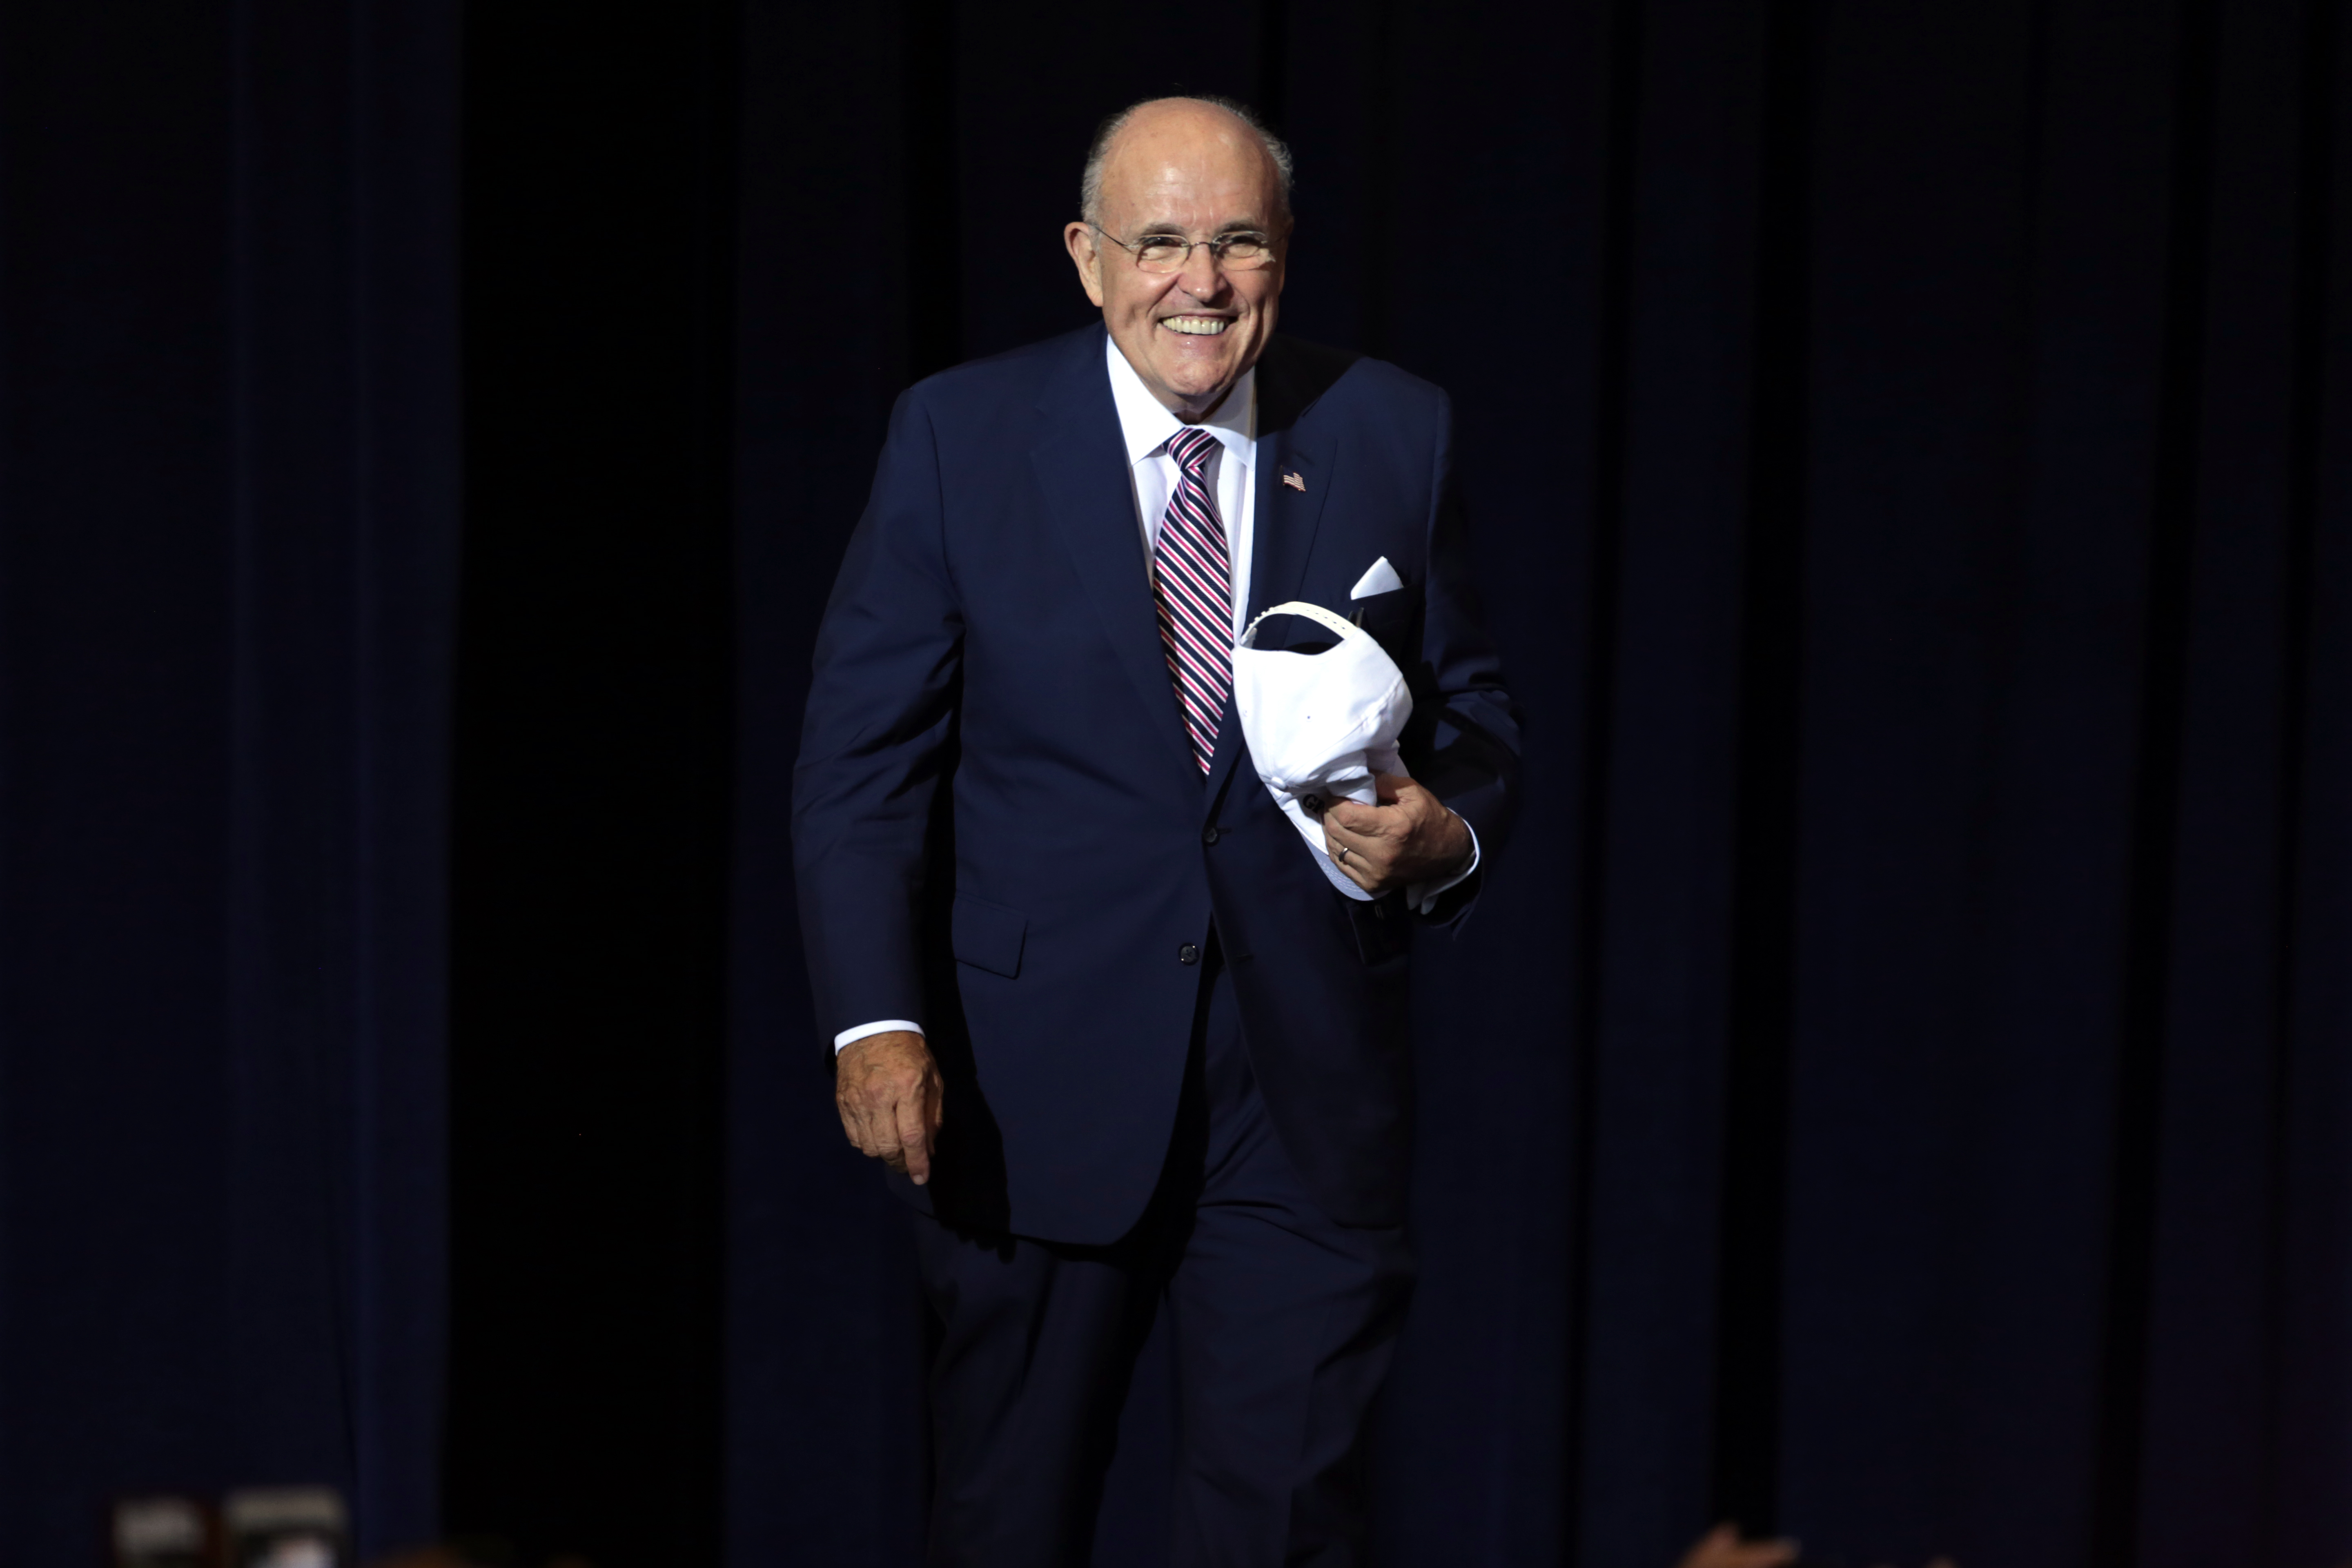 Federal judge approves release of documents from Giuliani associate to House committees